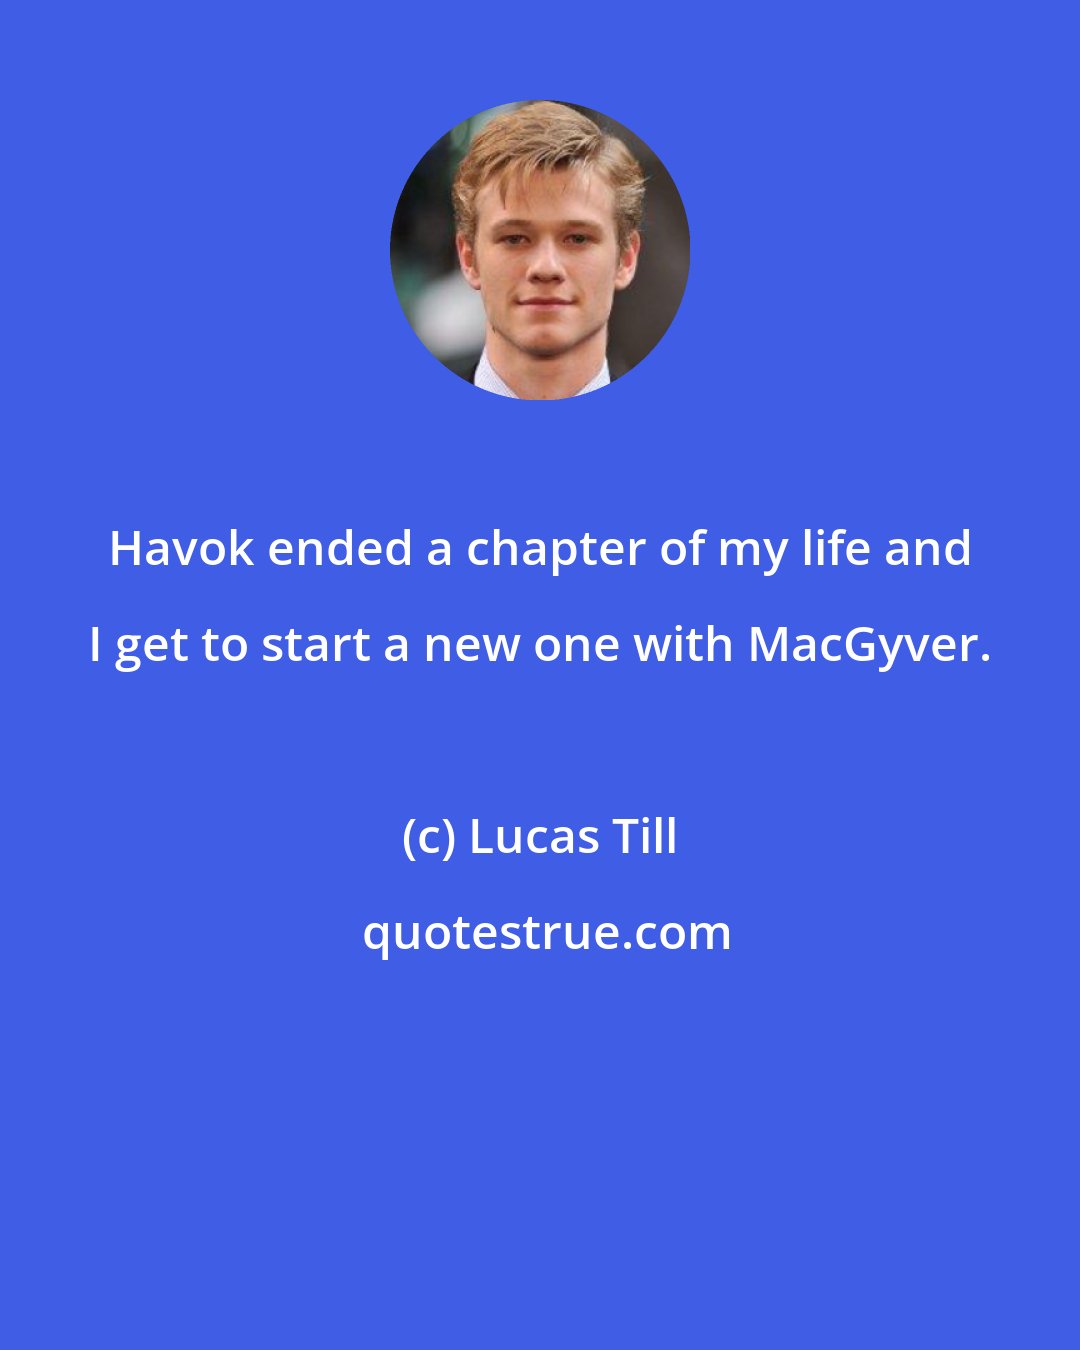 Lucas Till: Havok ended a chapter of my life and I get to start a new one with MacGyver.